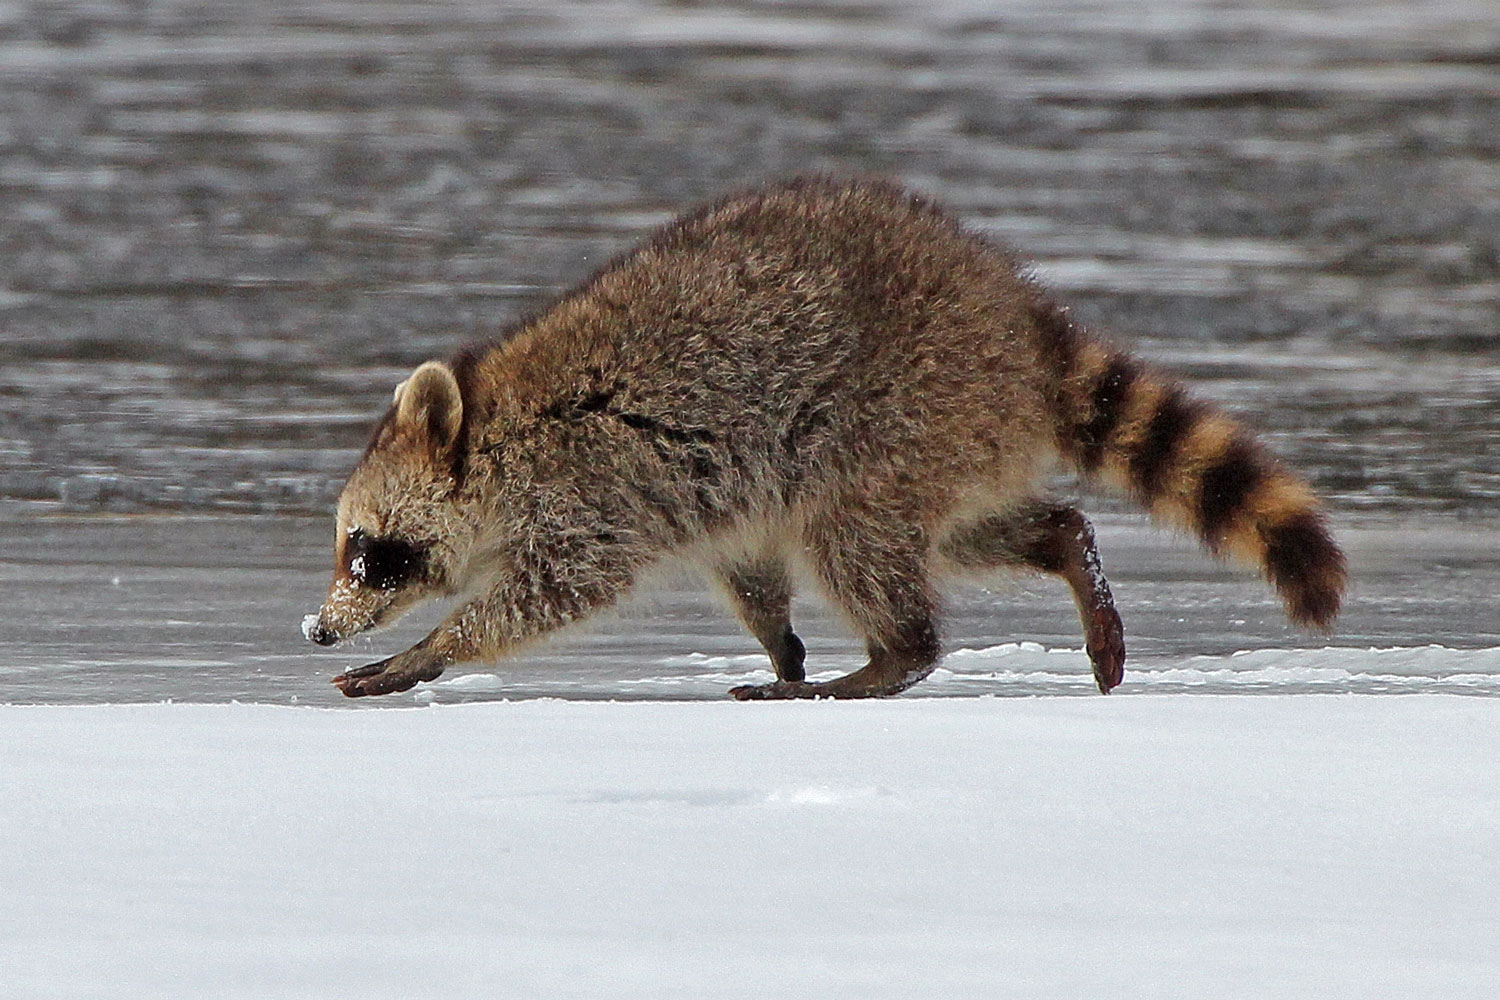 A raccoon walking on snow-covered ground with water in the background.